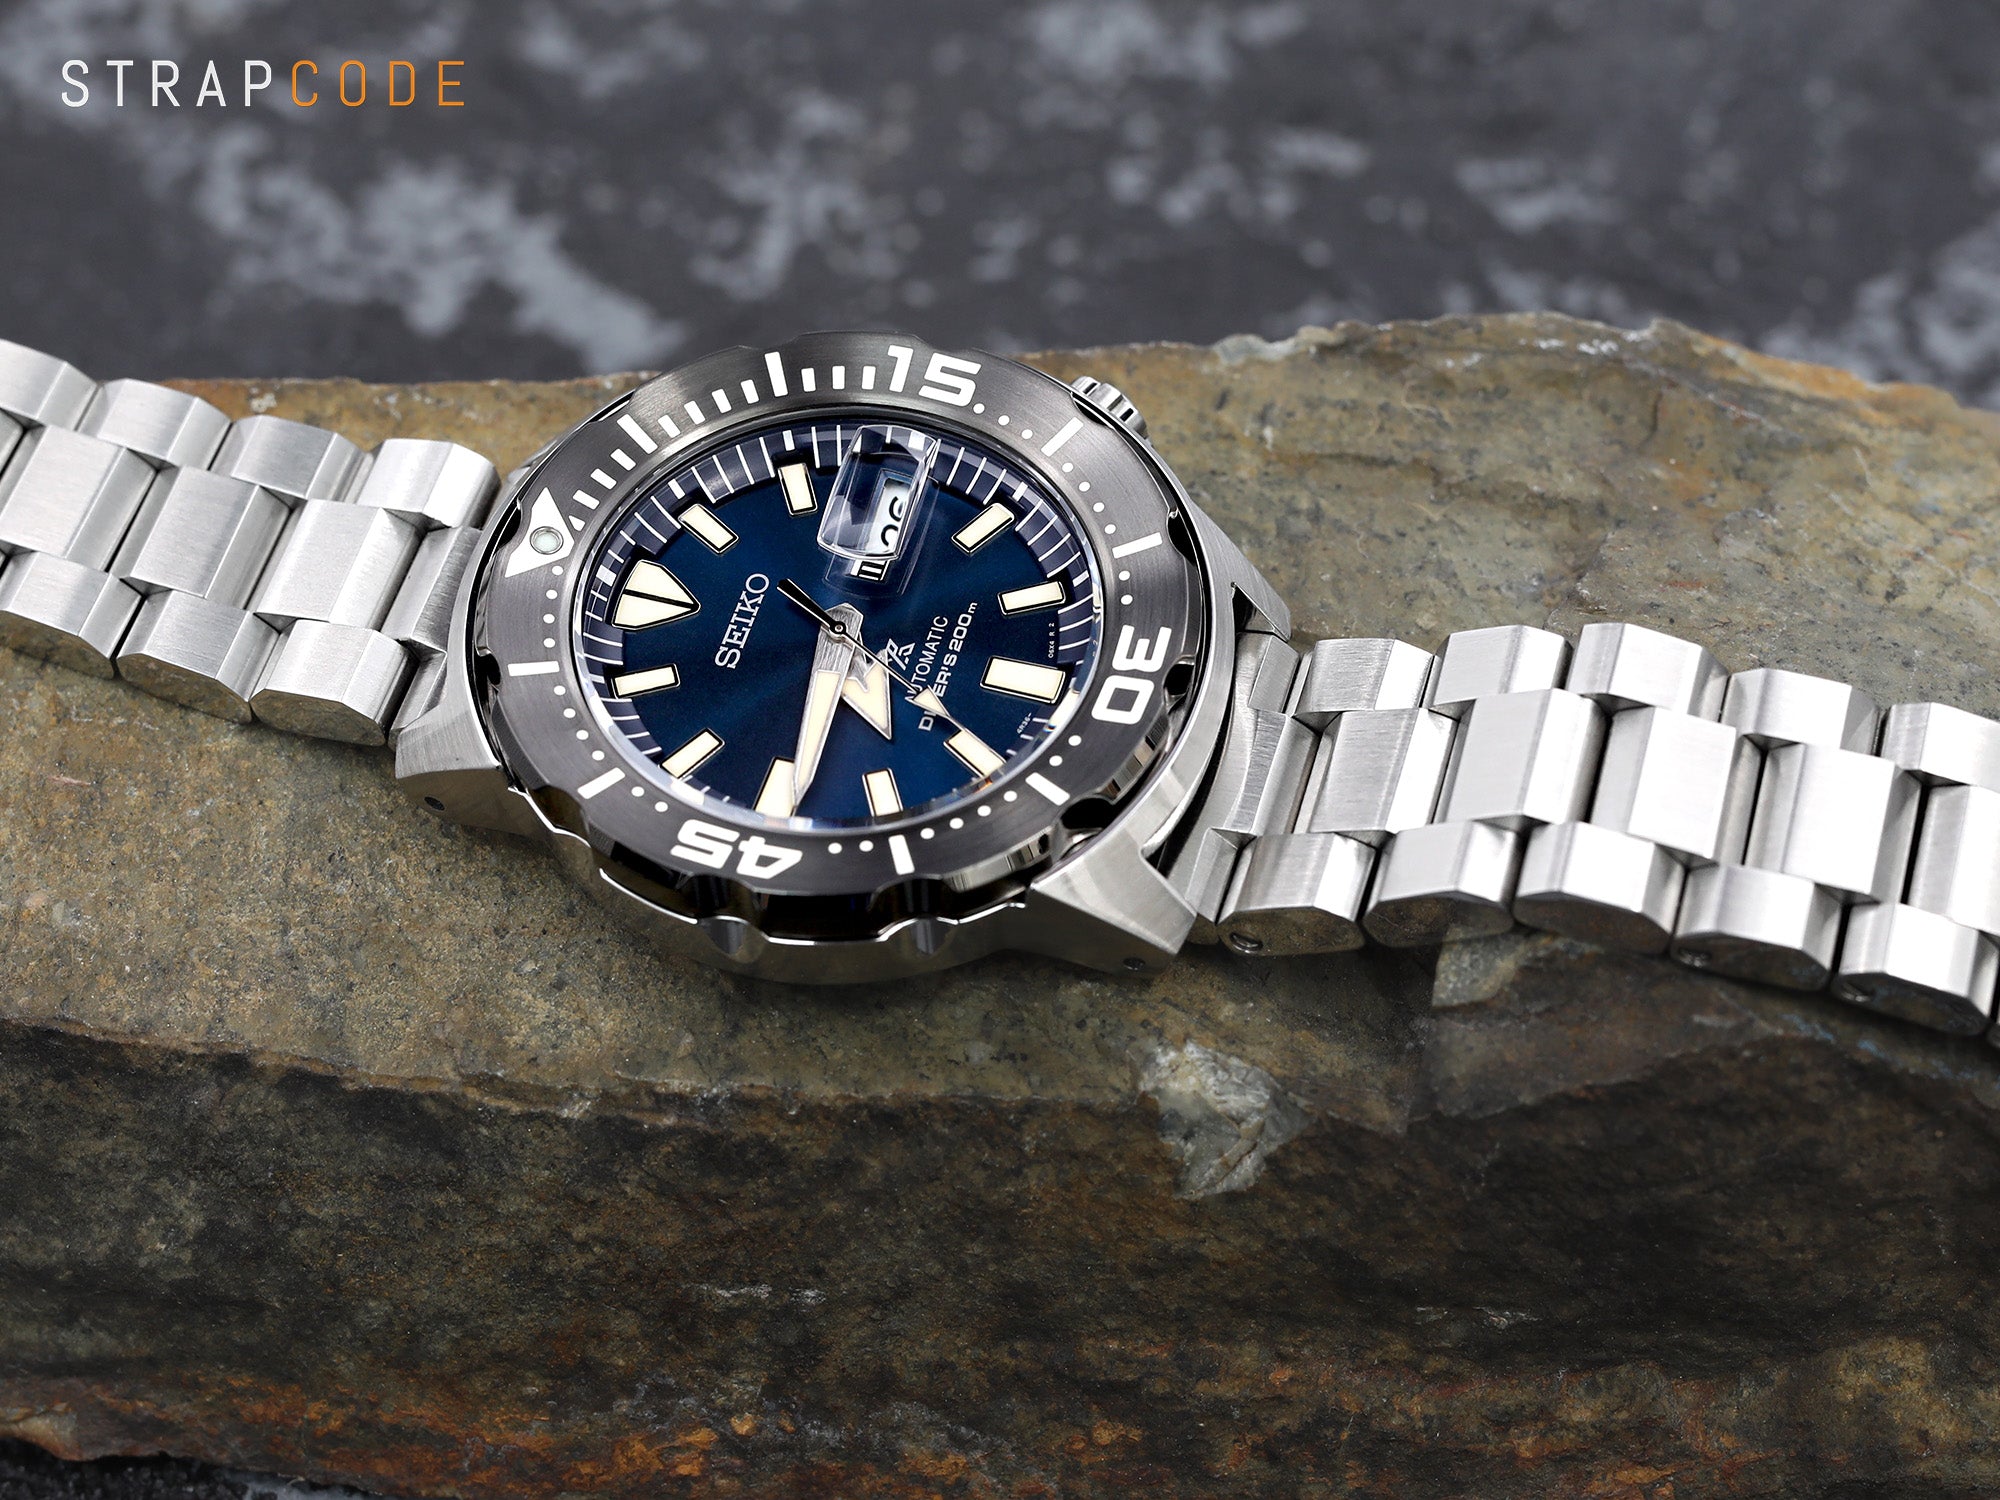 Seiko's Latest “MONSTER” Dive Watch | Strapcode